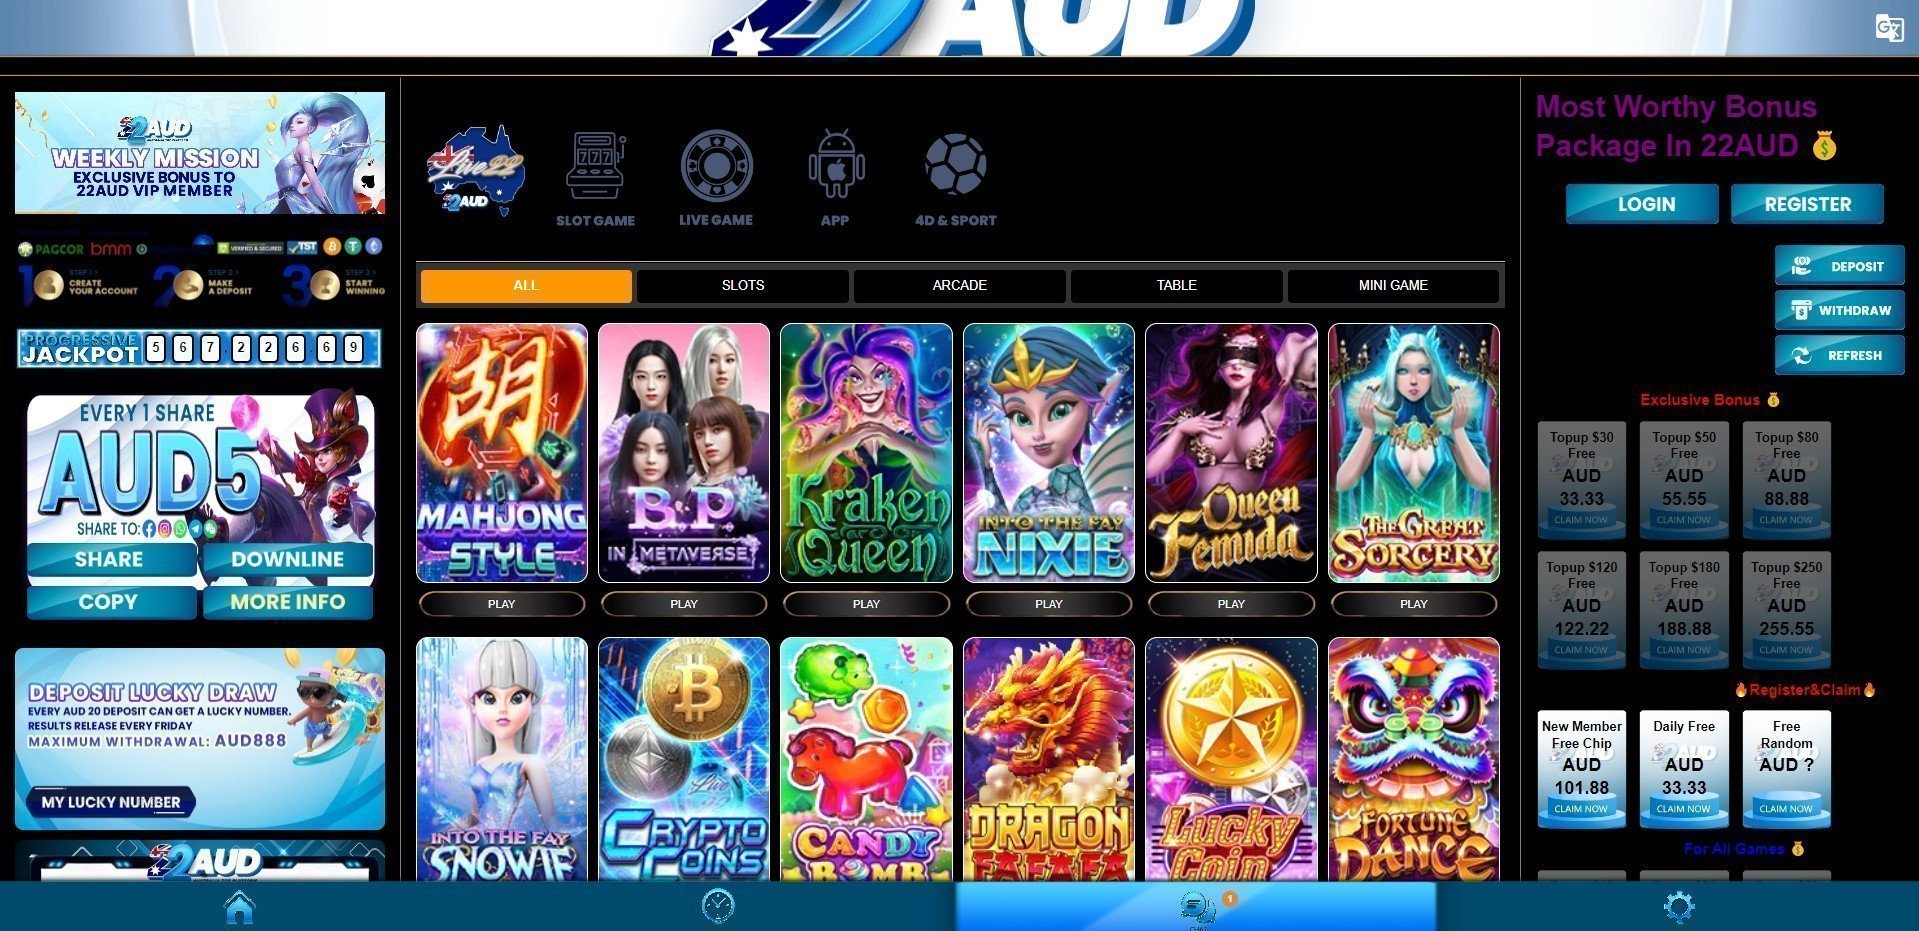 22AUD Casino Review